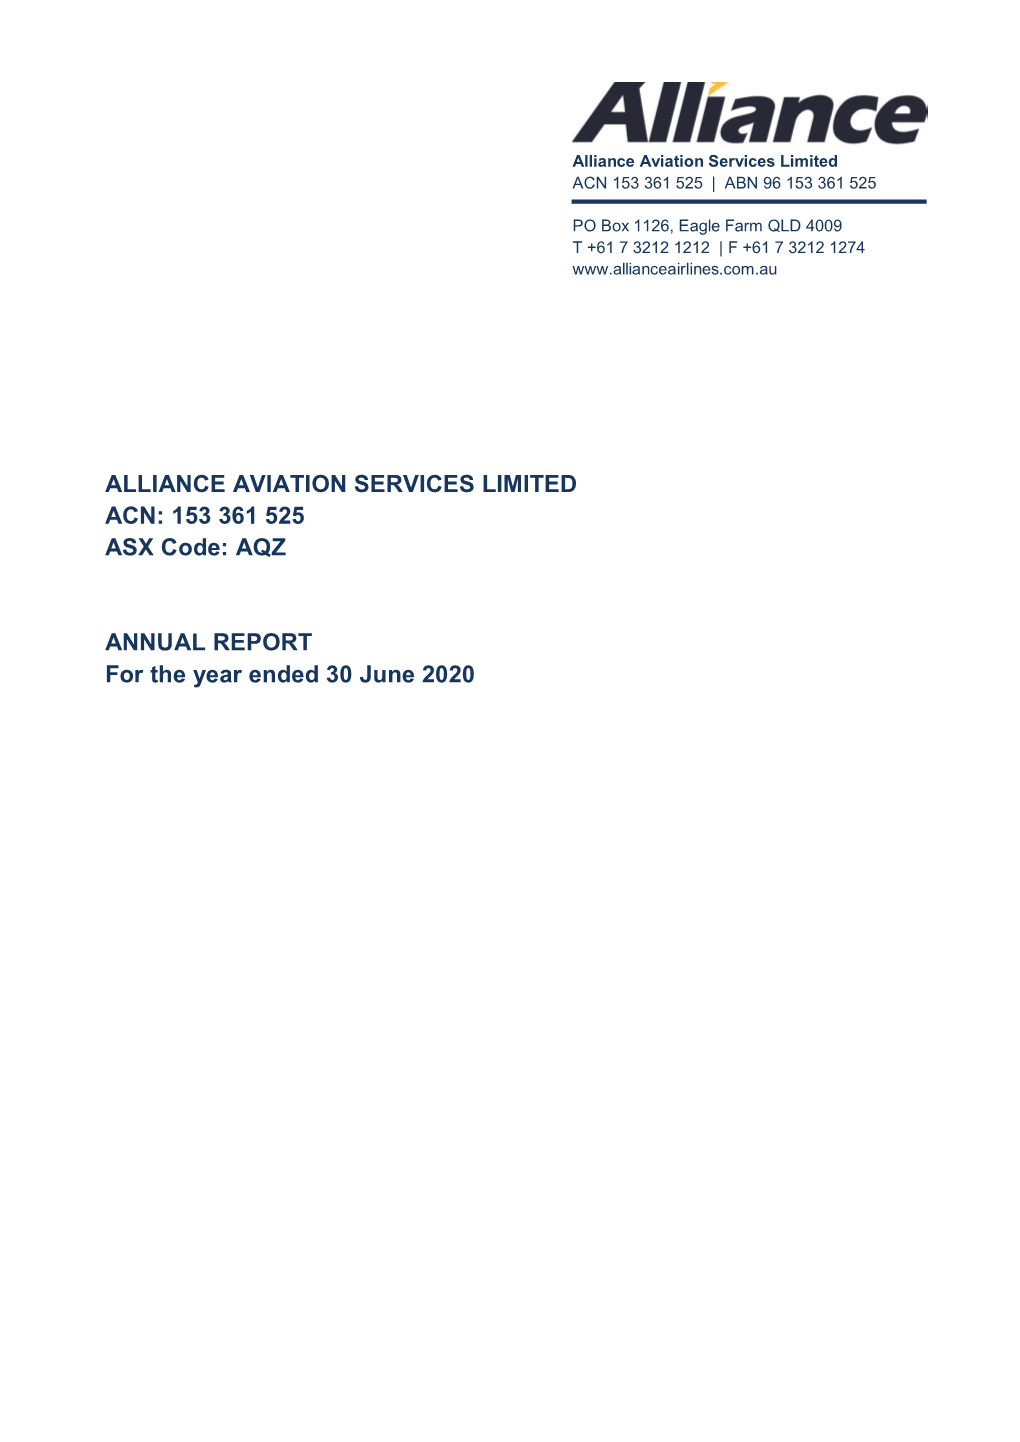 ALLIANCE AVIATION SERVICES LIMITED ACN: 153 361 525 ASX Code: AQZ ANNUAL REPORT for the Year Ended 30 June 2020